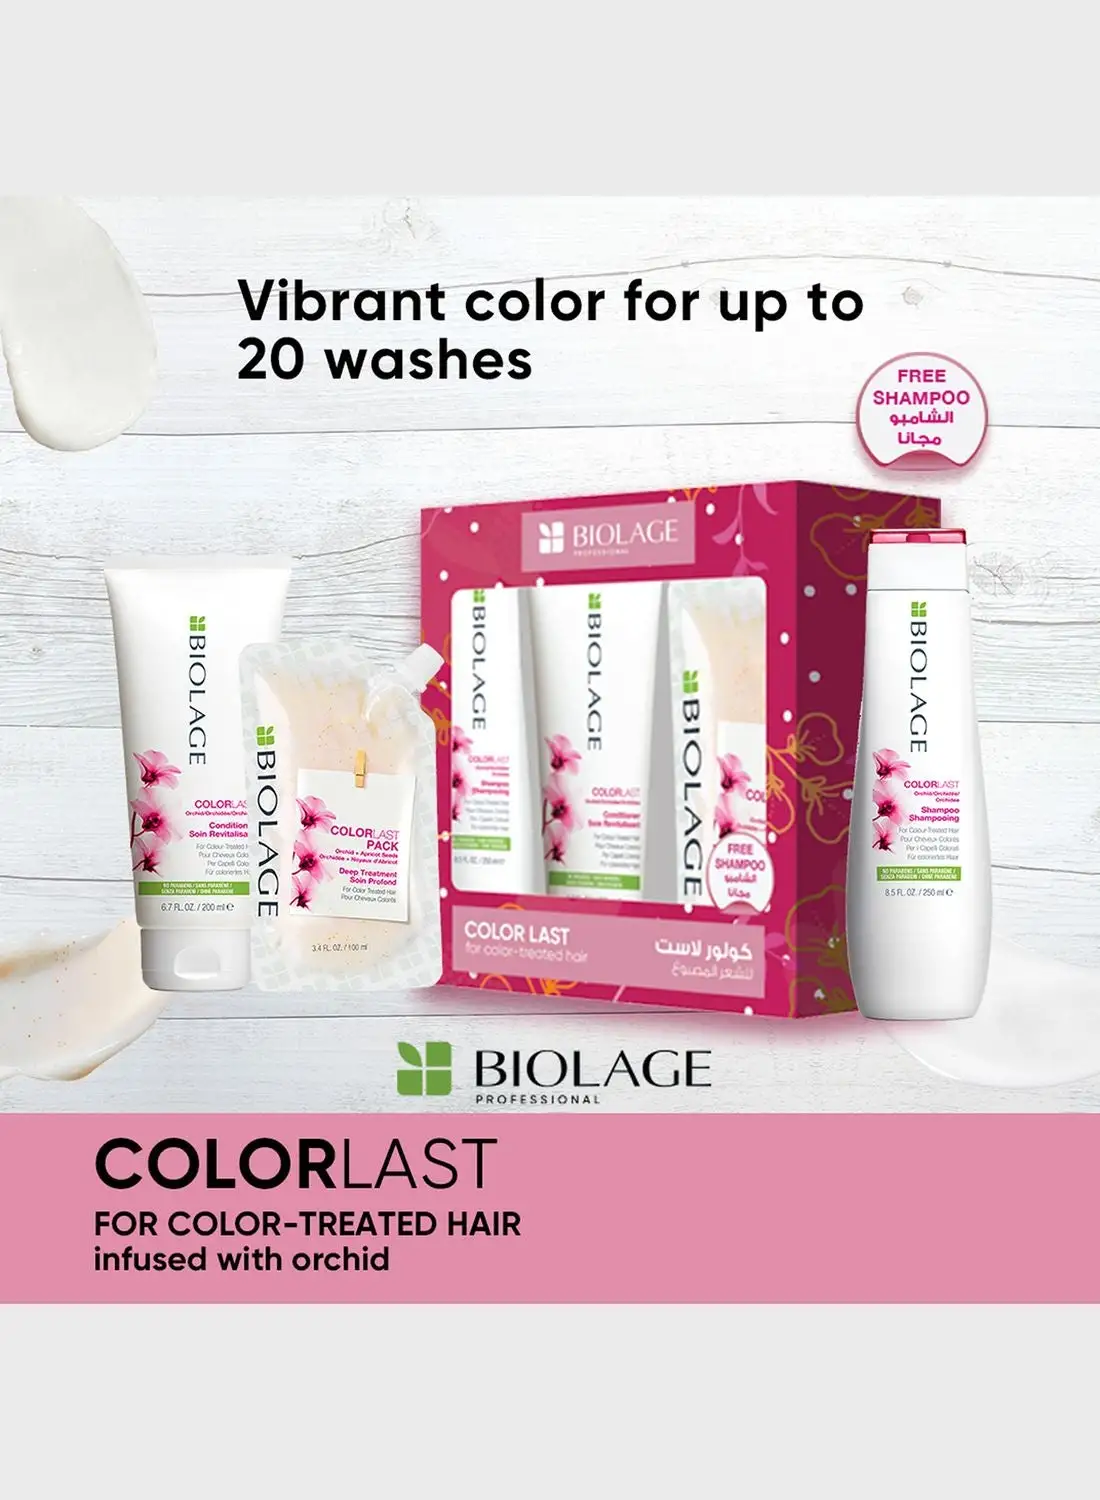 Biolage Colorlast Copack including a Conditioner & Mask with a complimentary Shampoo